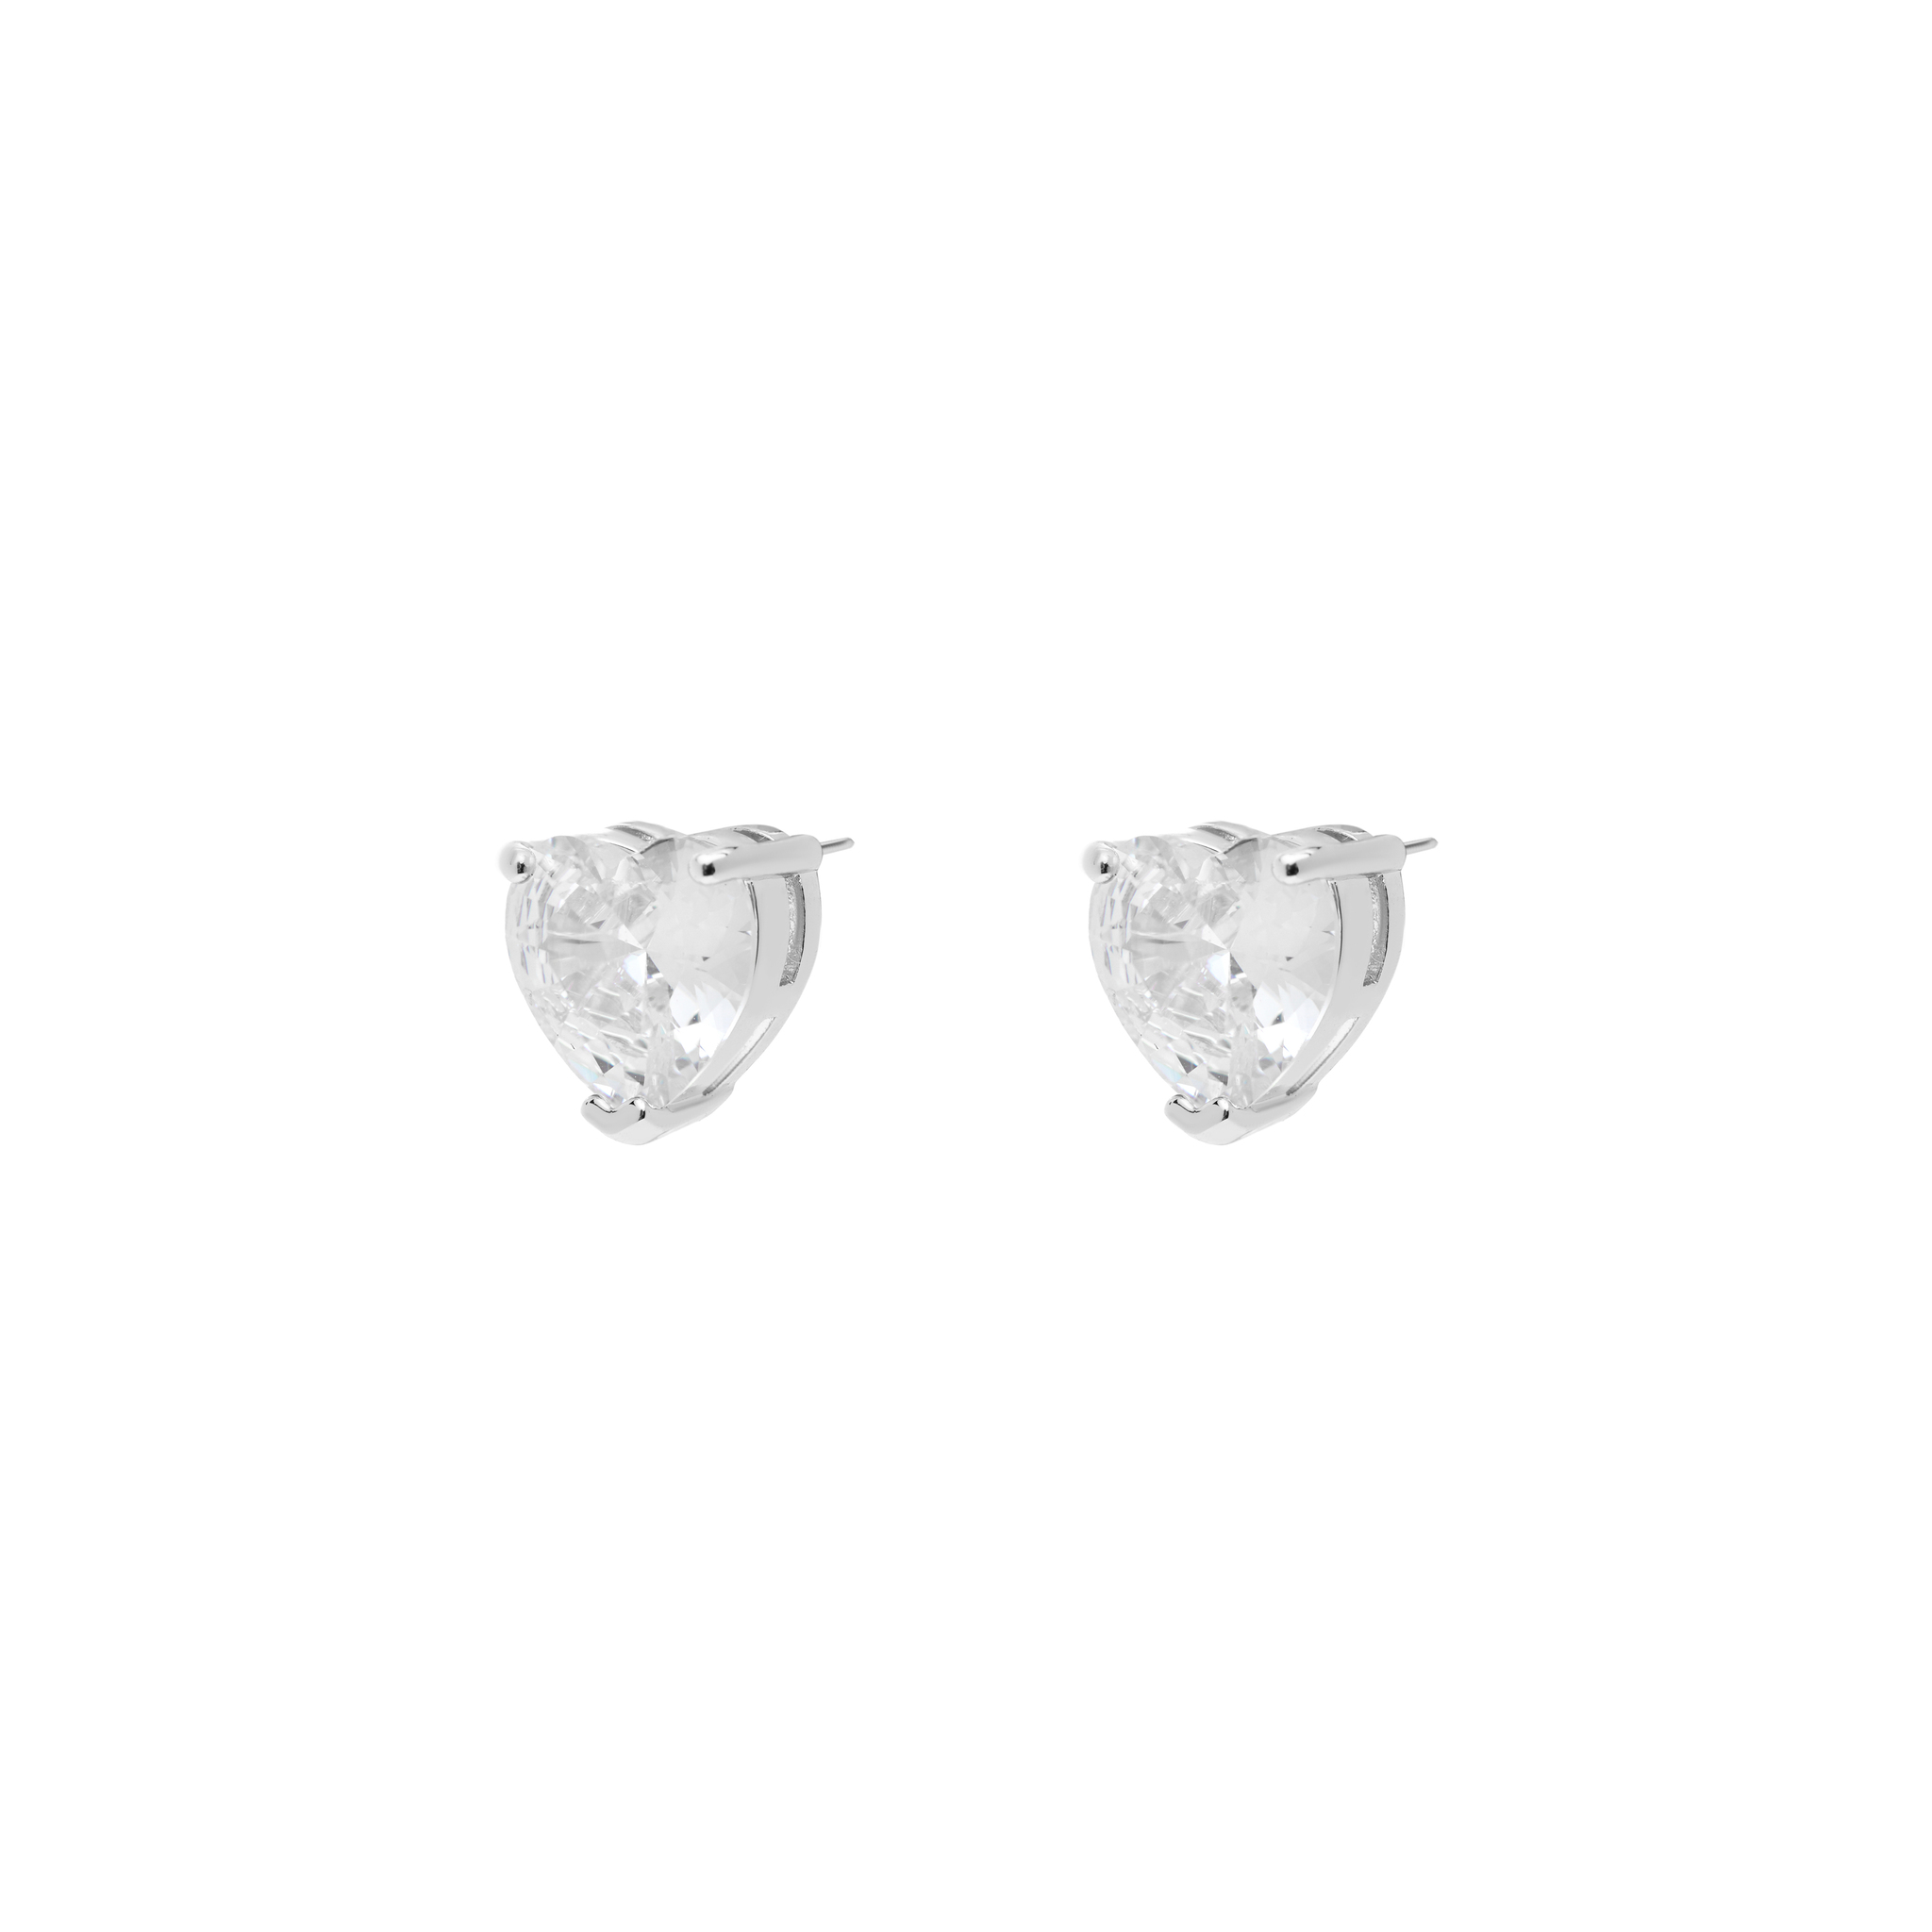 CELESTE STARRE Серьги The French Earrings – Silver celeste starre серьги heaven s sparkle earrings